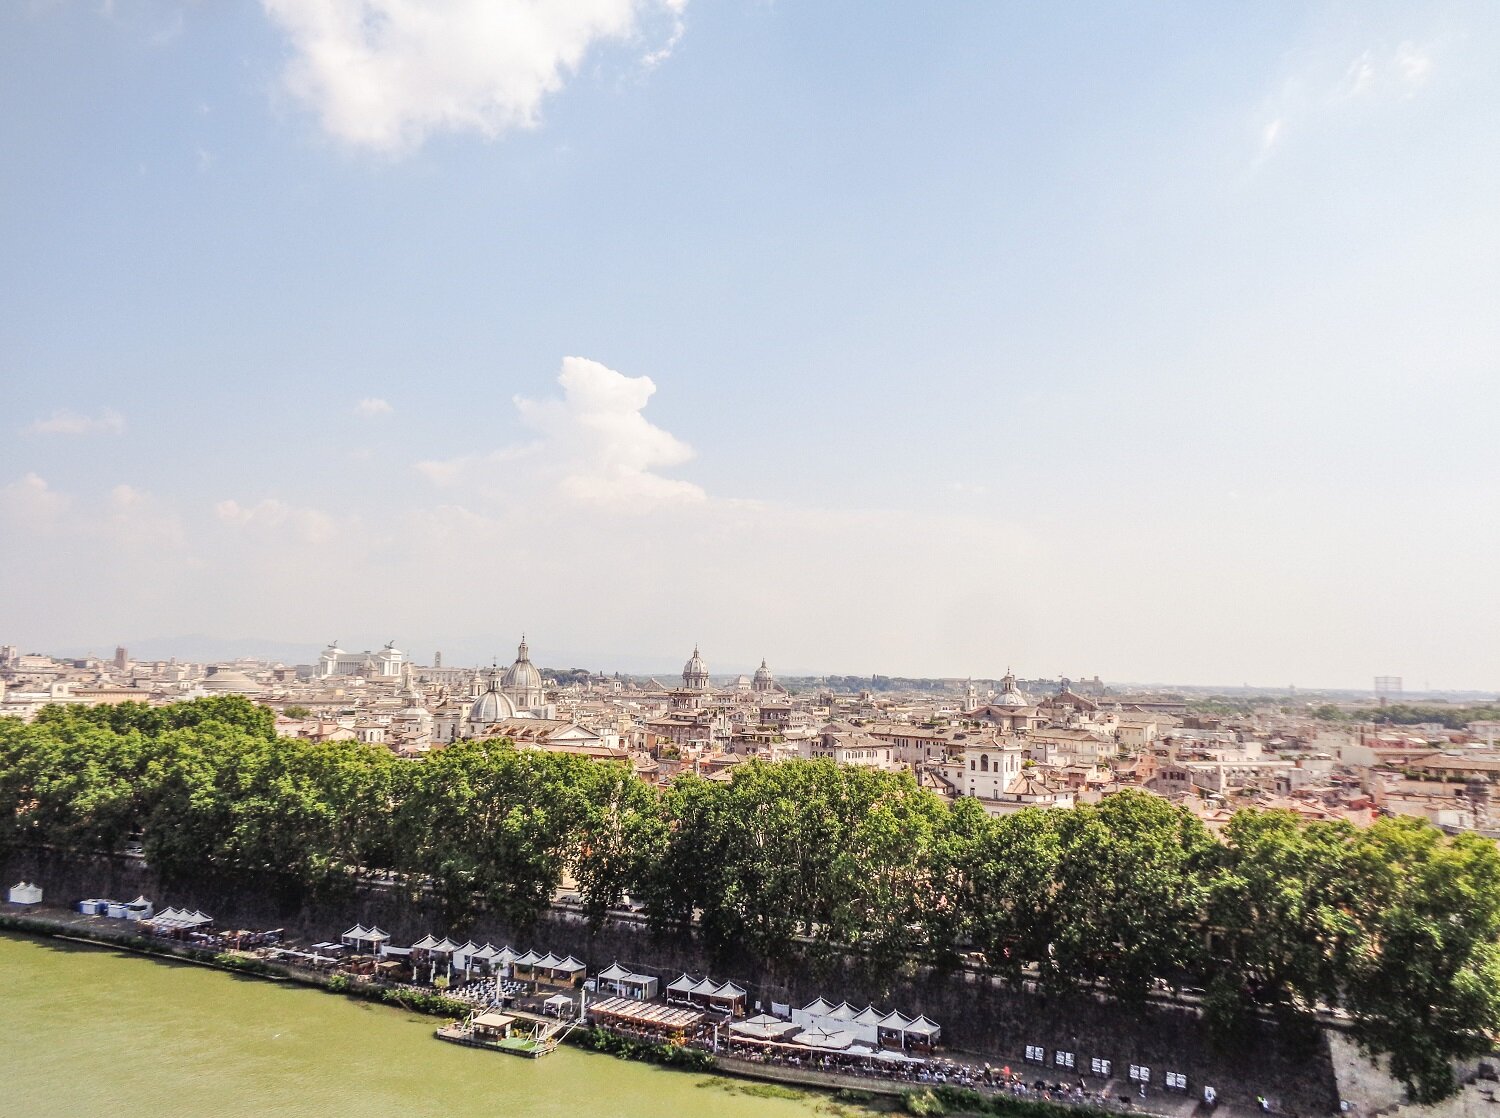 Rome seen from Castel Sant'Angelo